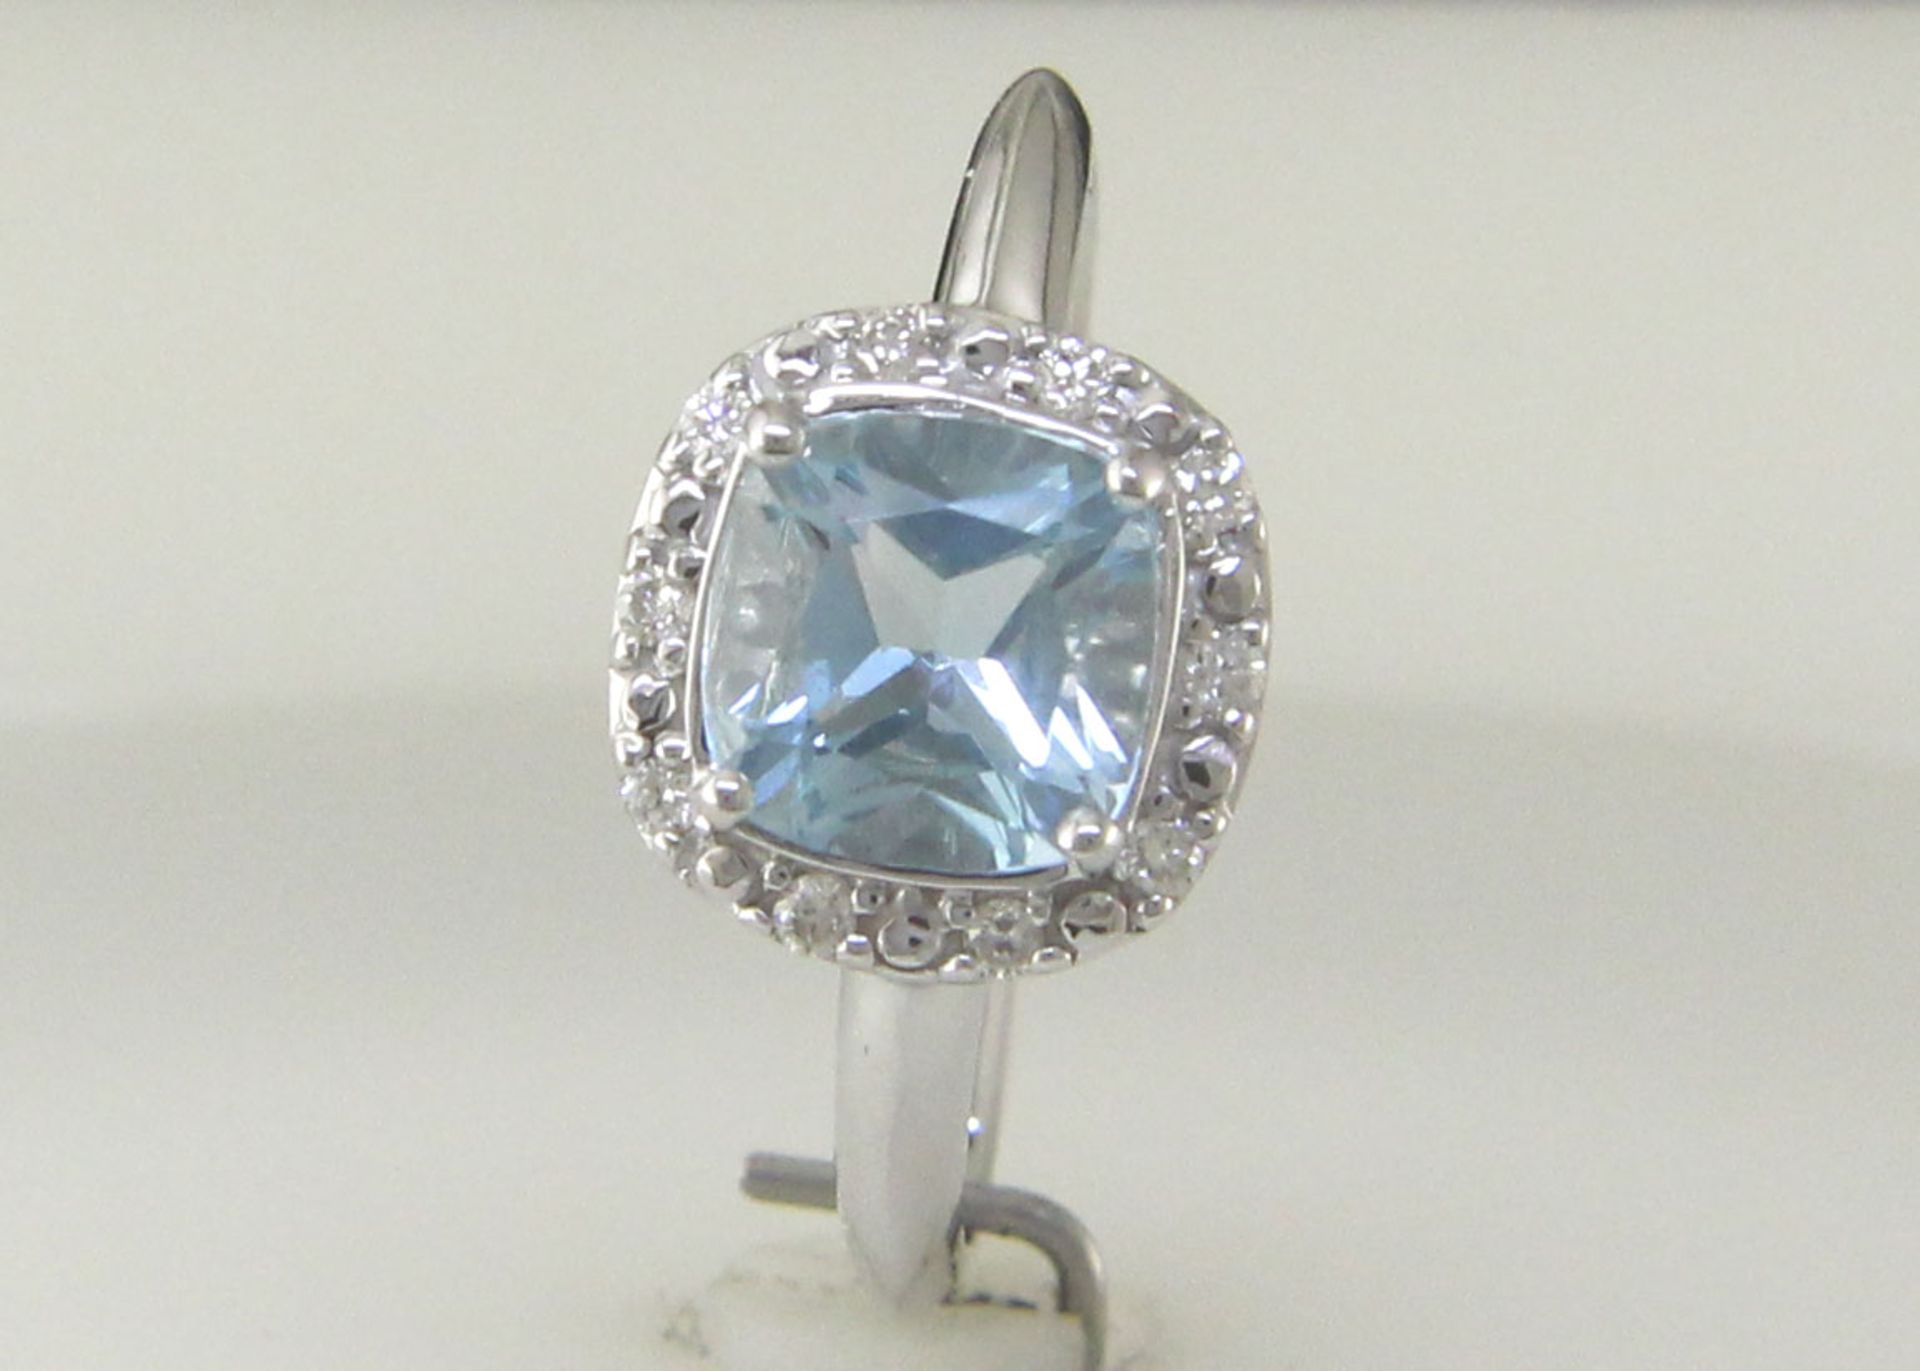 9ct White Gold Diamond And Blue Topaz Ring (BT1.79) 0.10 Carats - Valued By GIE £1,920.00 - A - Image 8 of 10